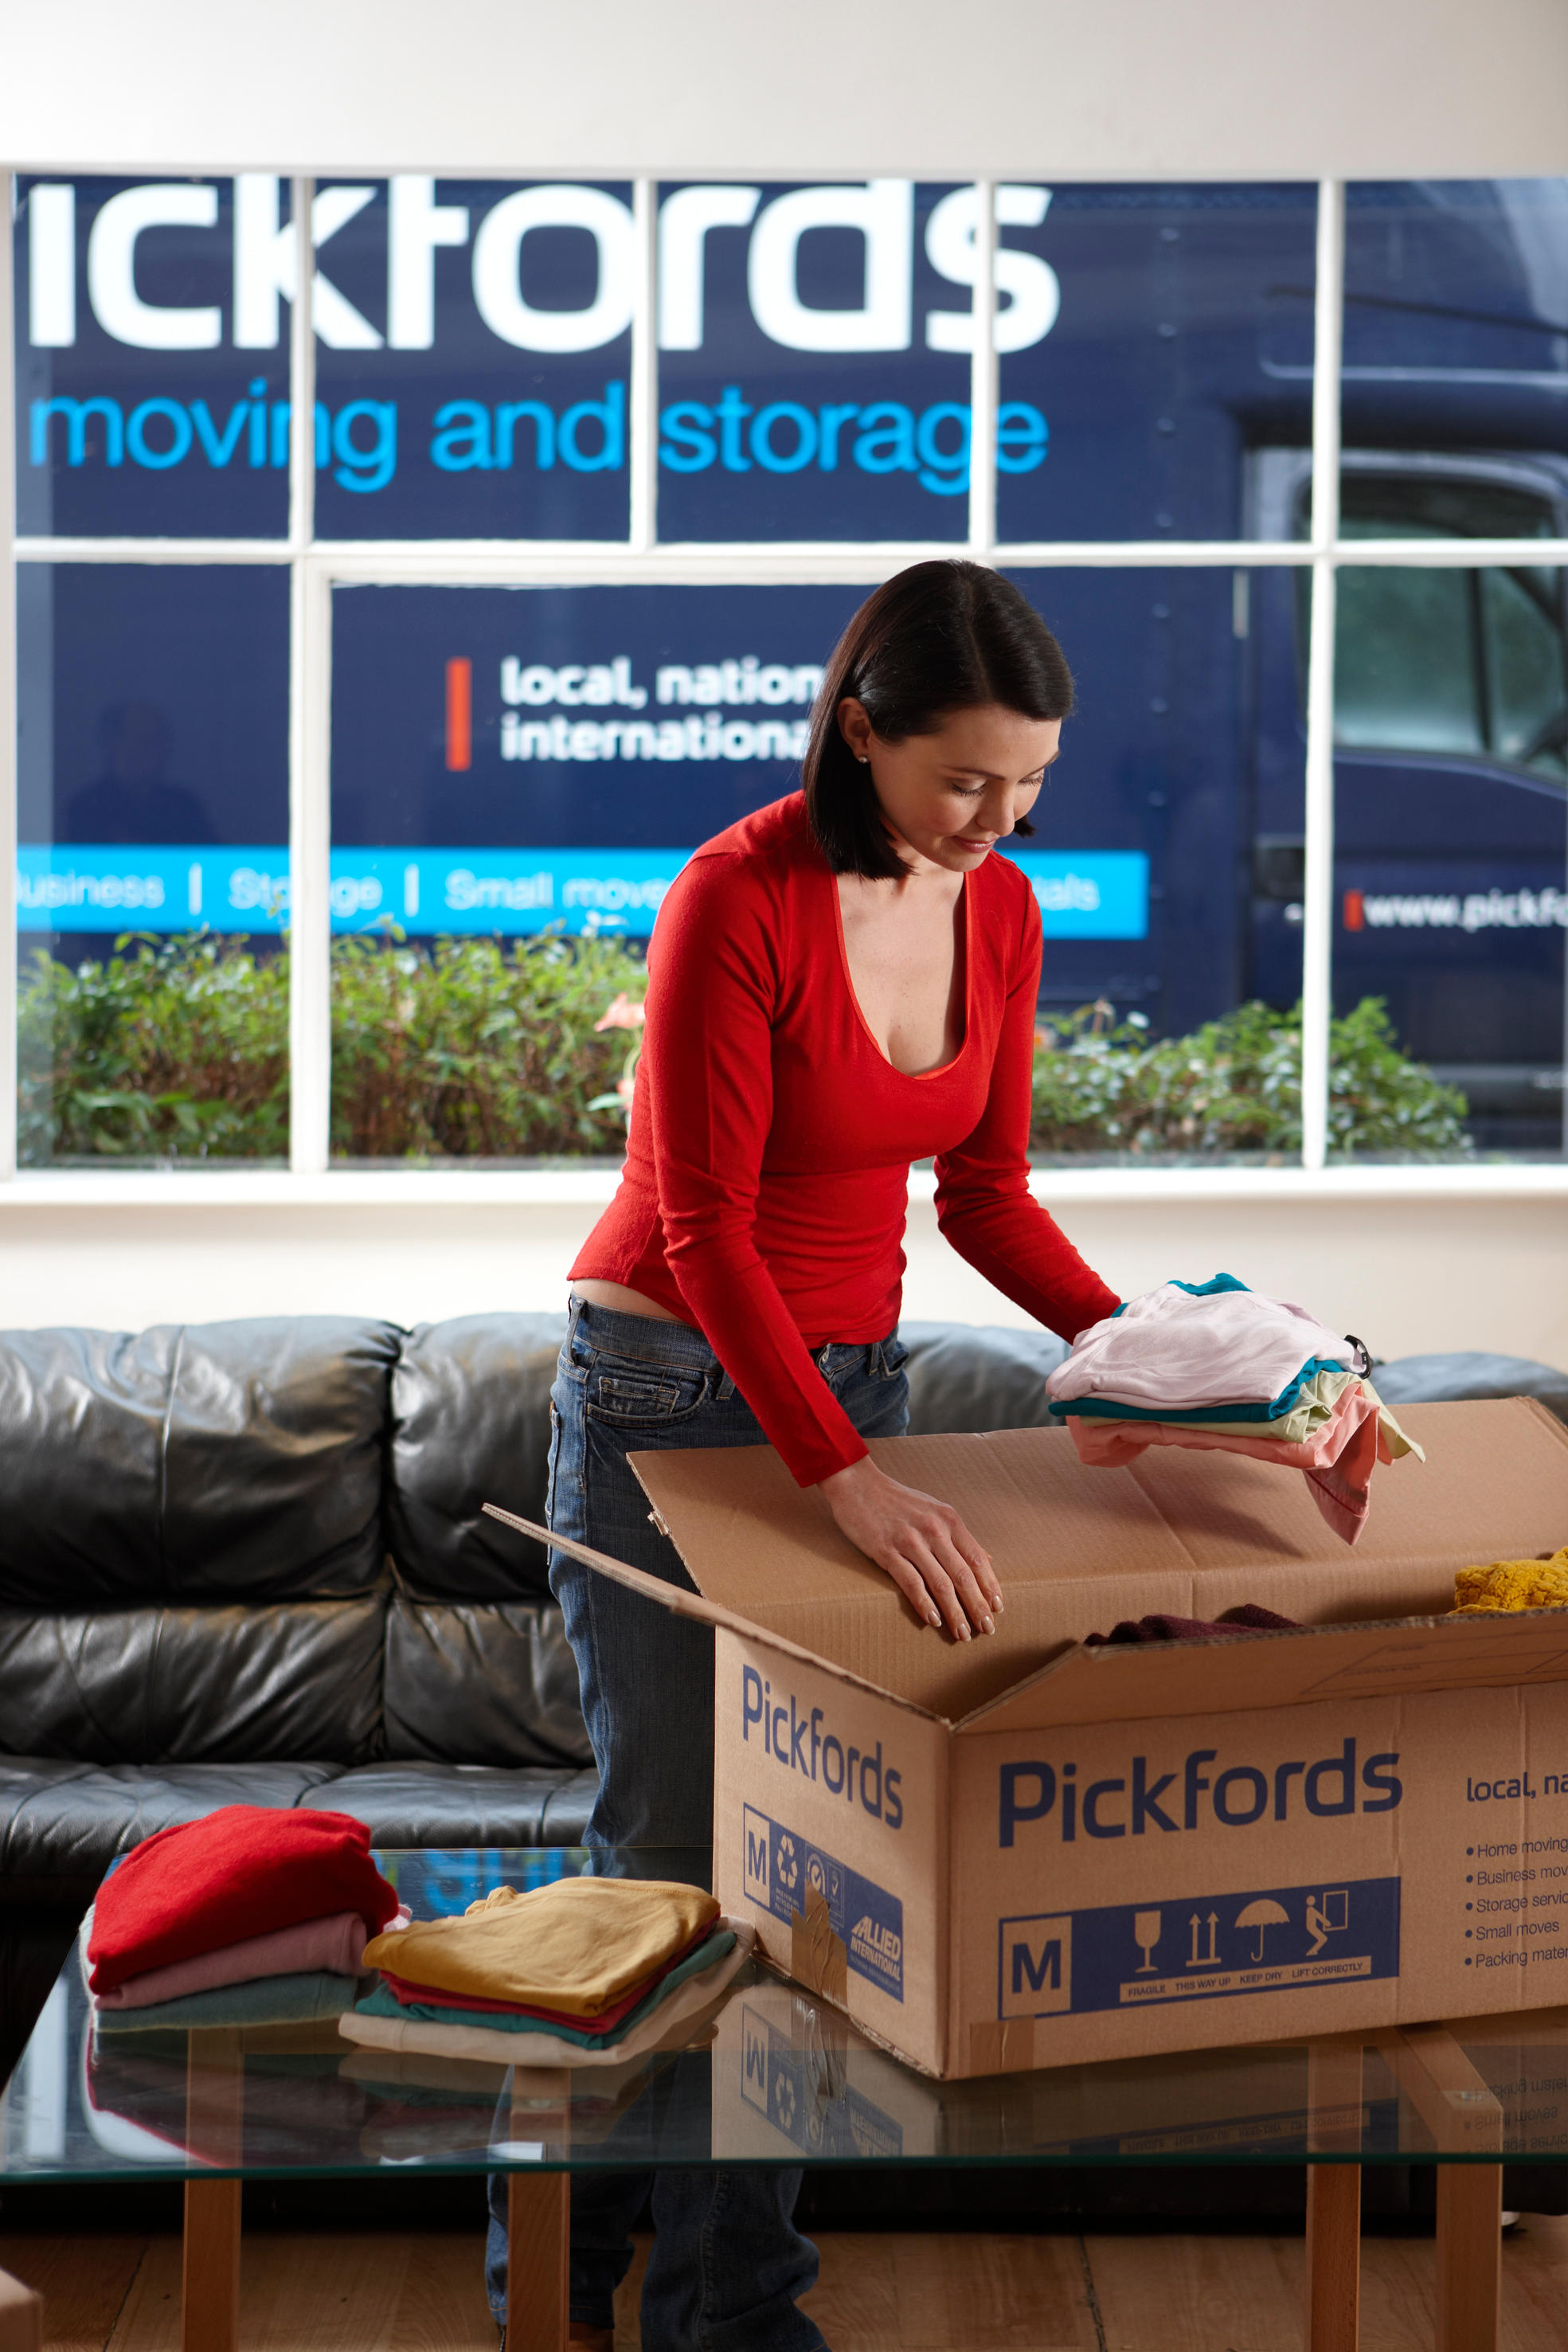 Customer packing using a Pickfords box Pickfords Moving and Storage Leeds 01133 220748